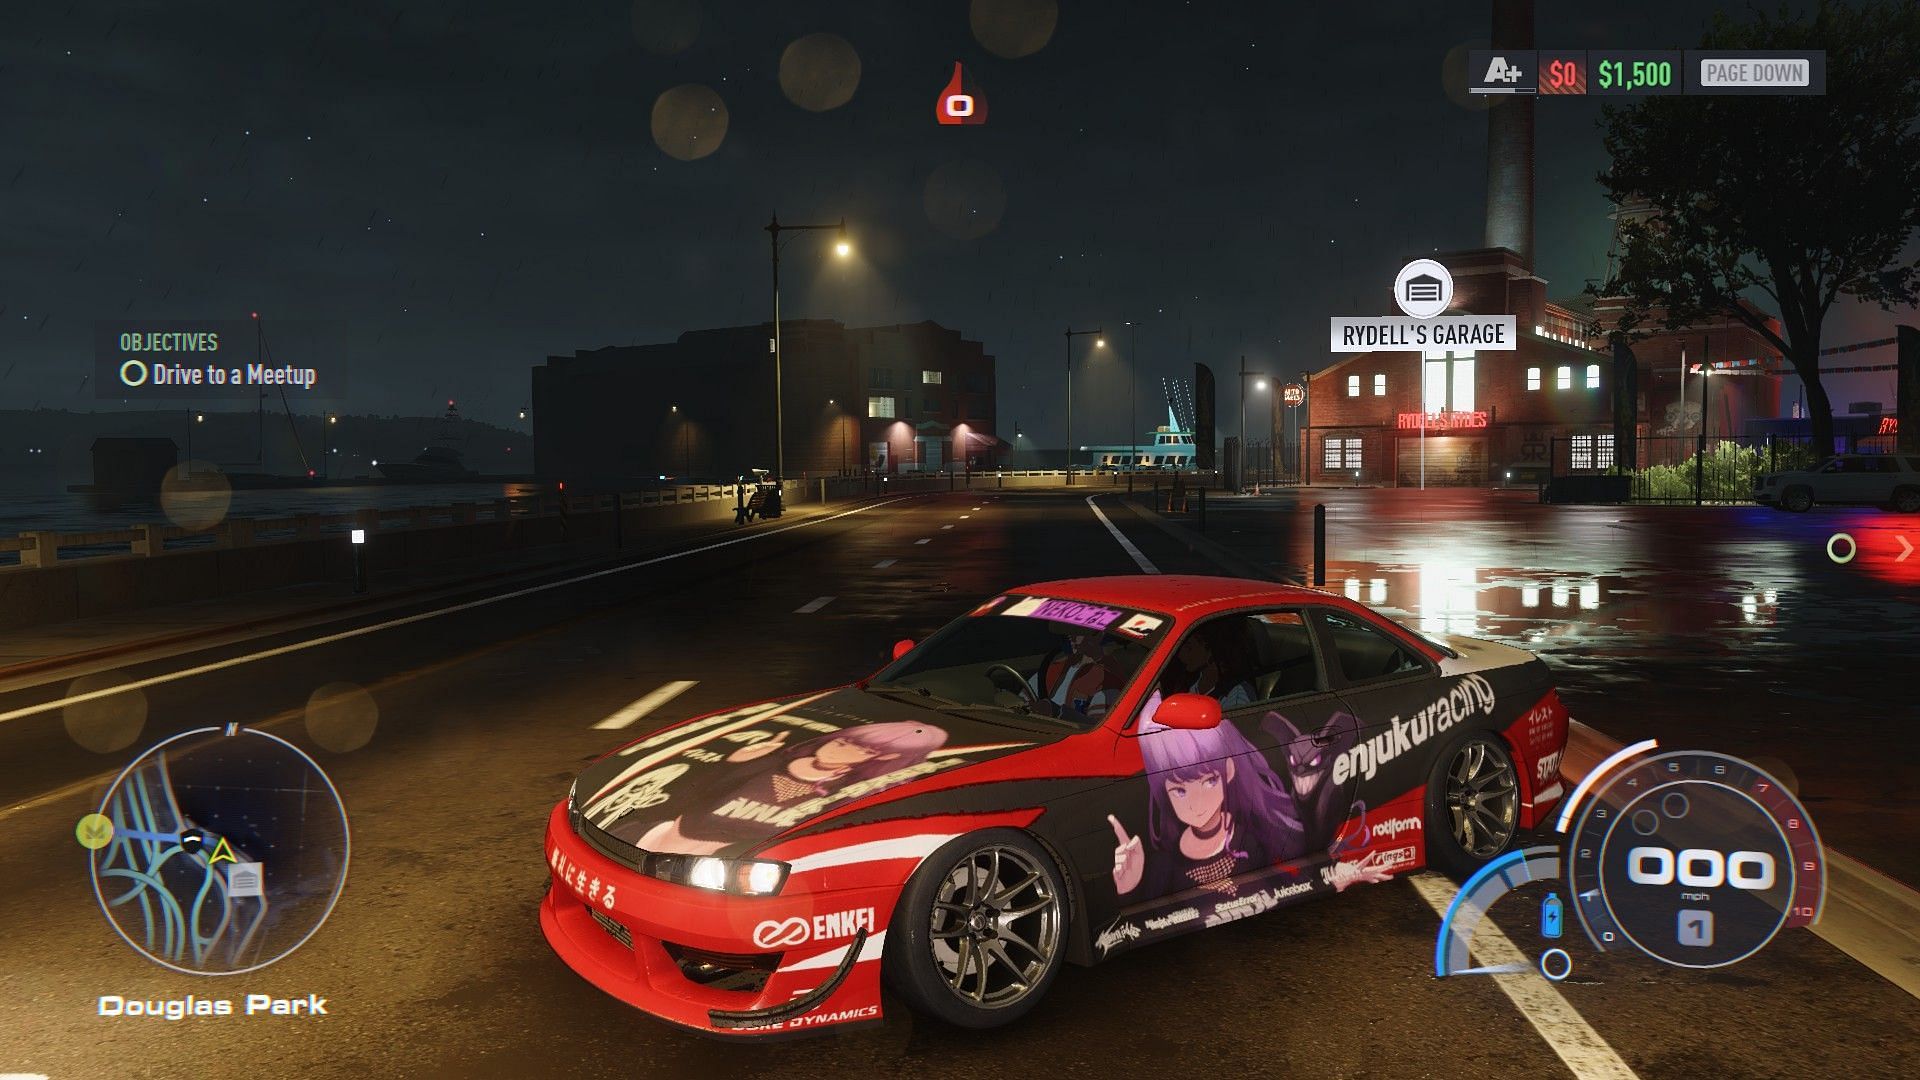 Need for Speed Unbound makes use of DICE